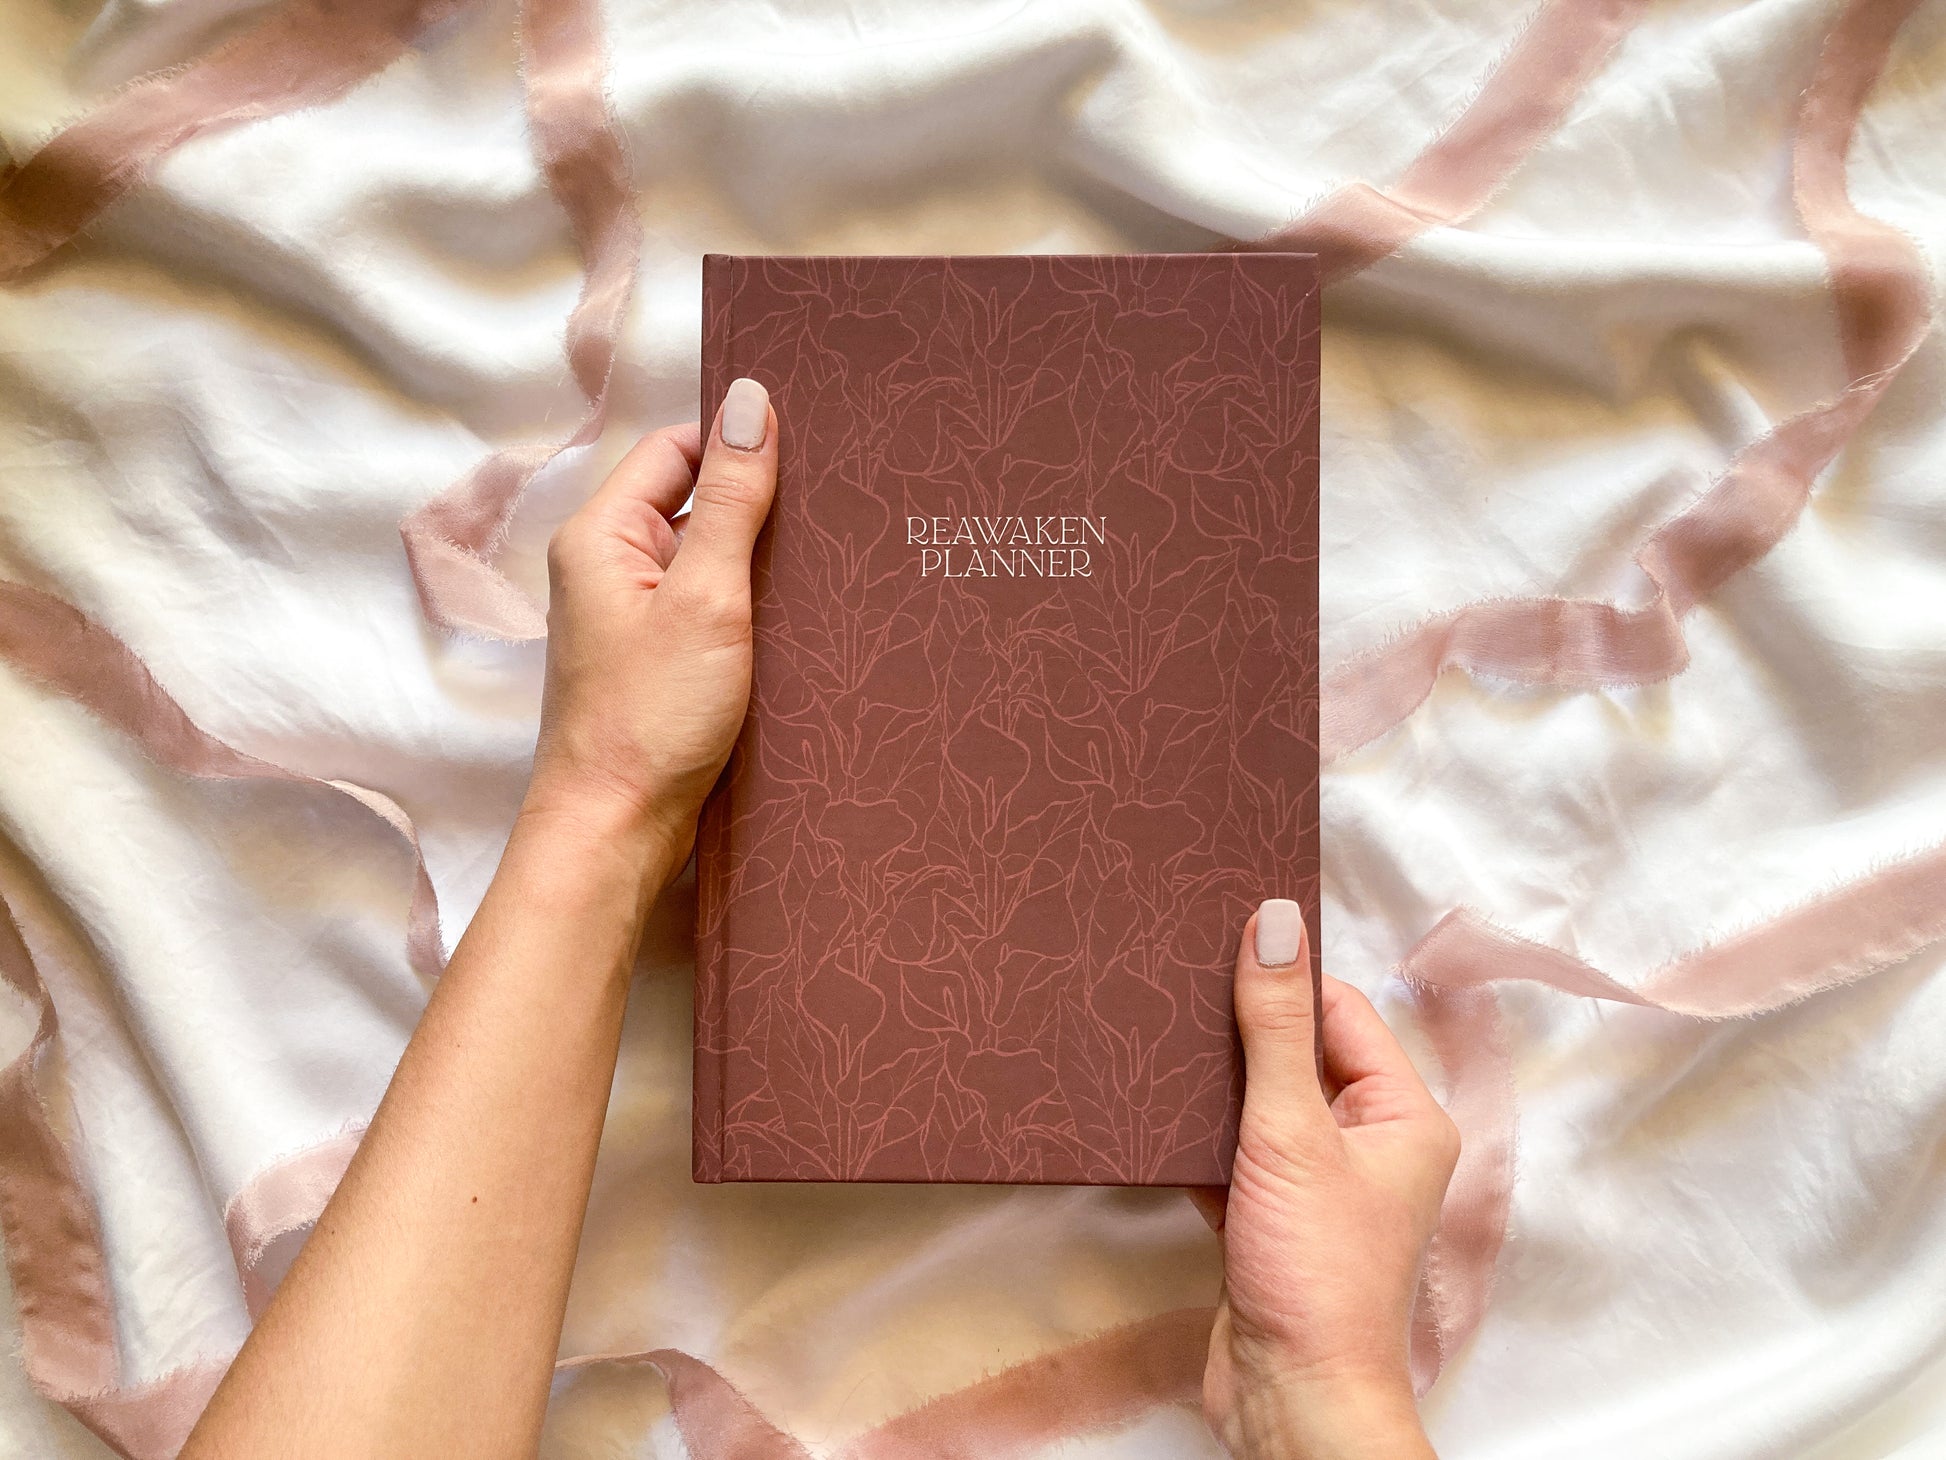 Image of Reawaken Planner cover. Maroon background with calla lily pattern texture.